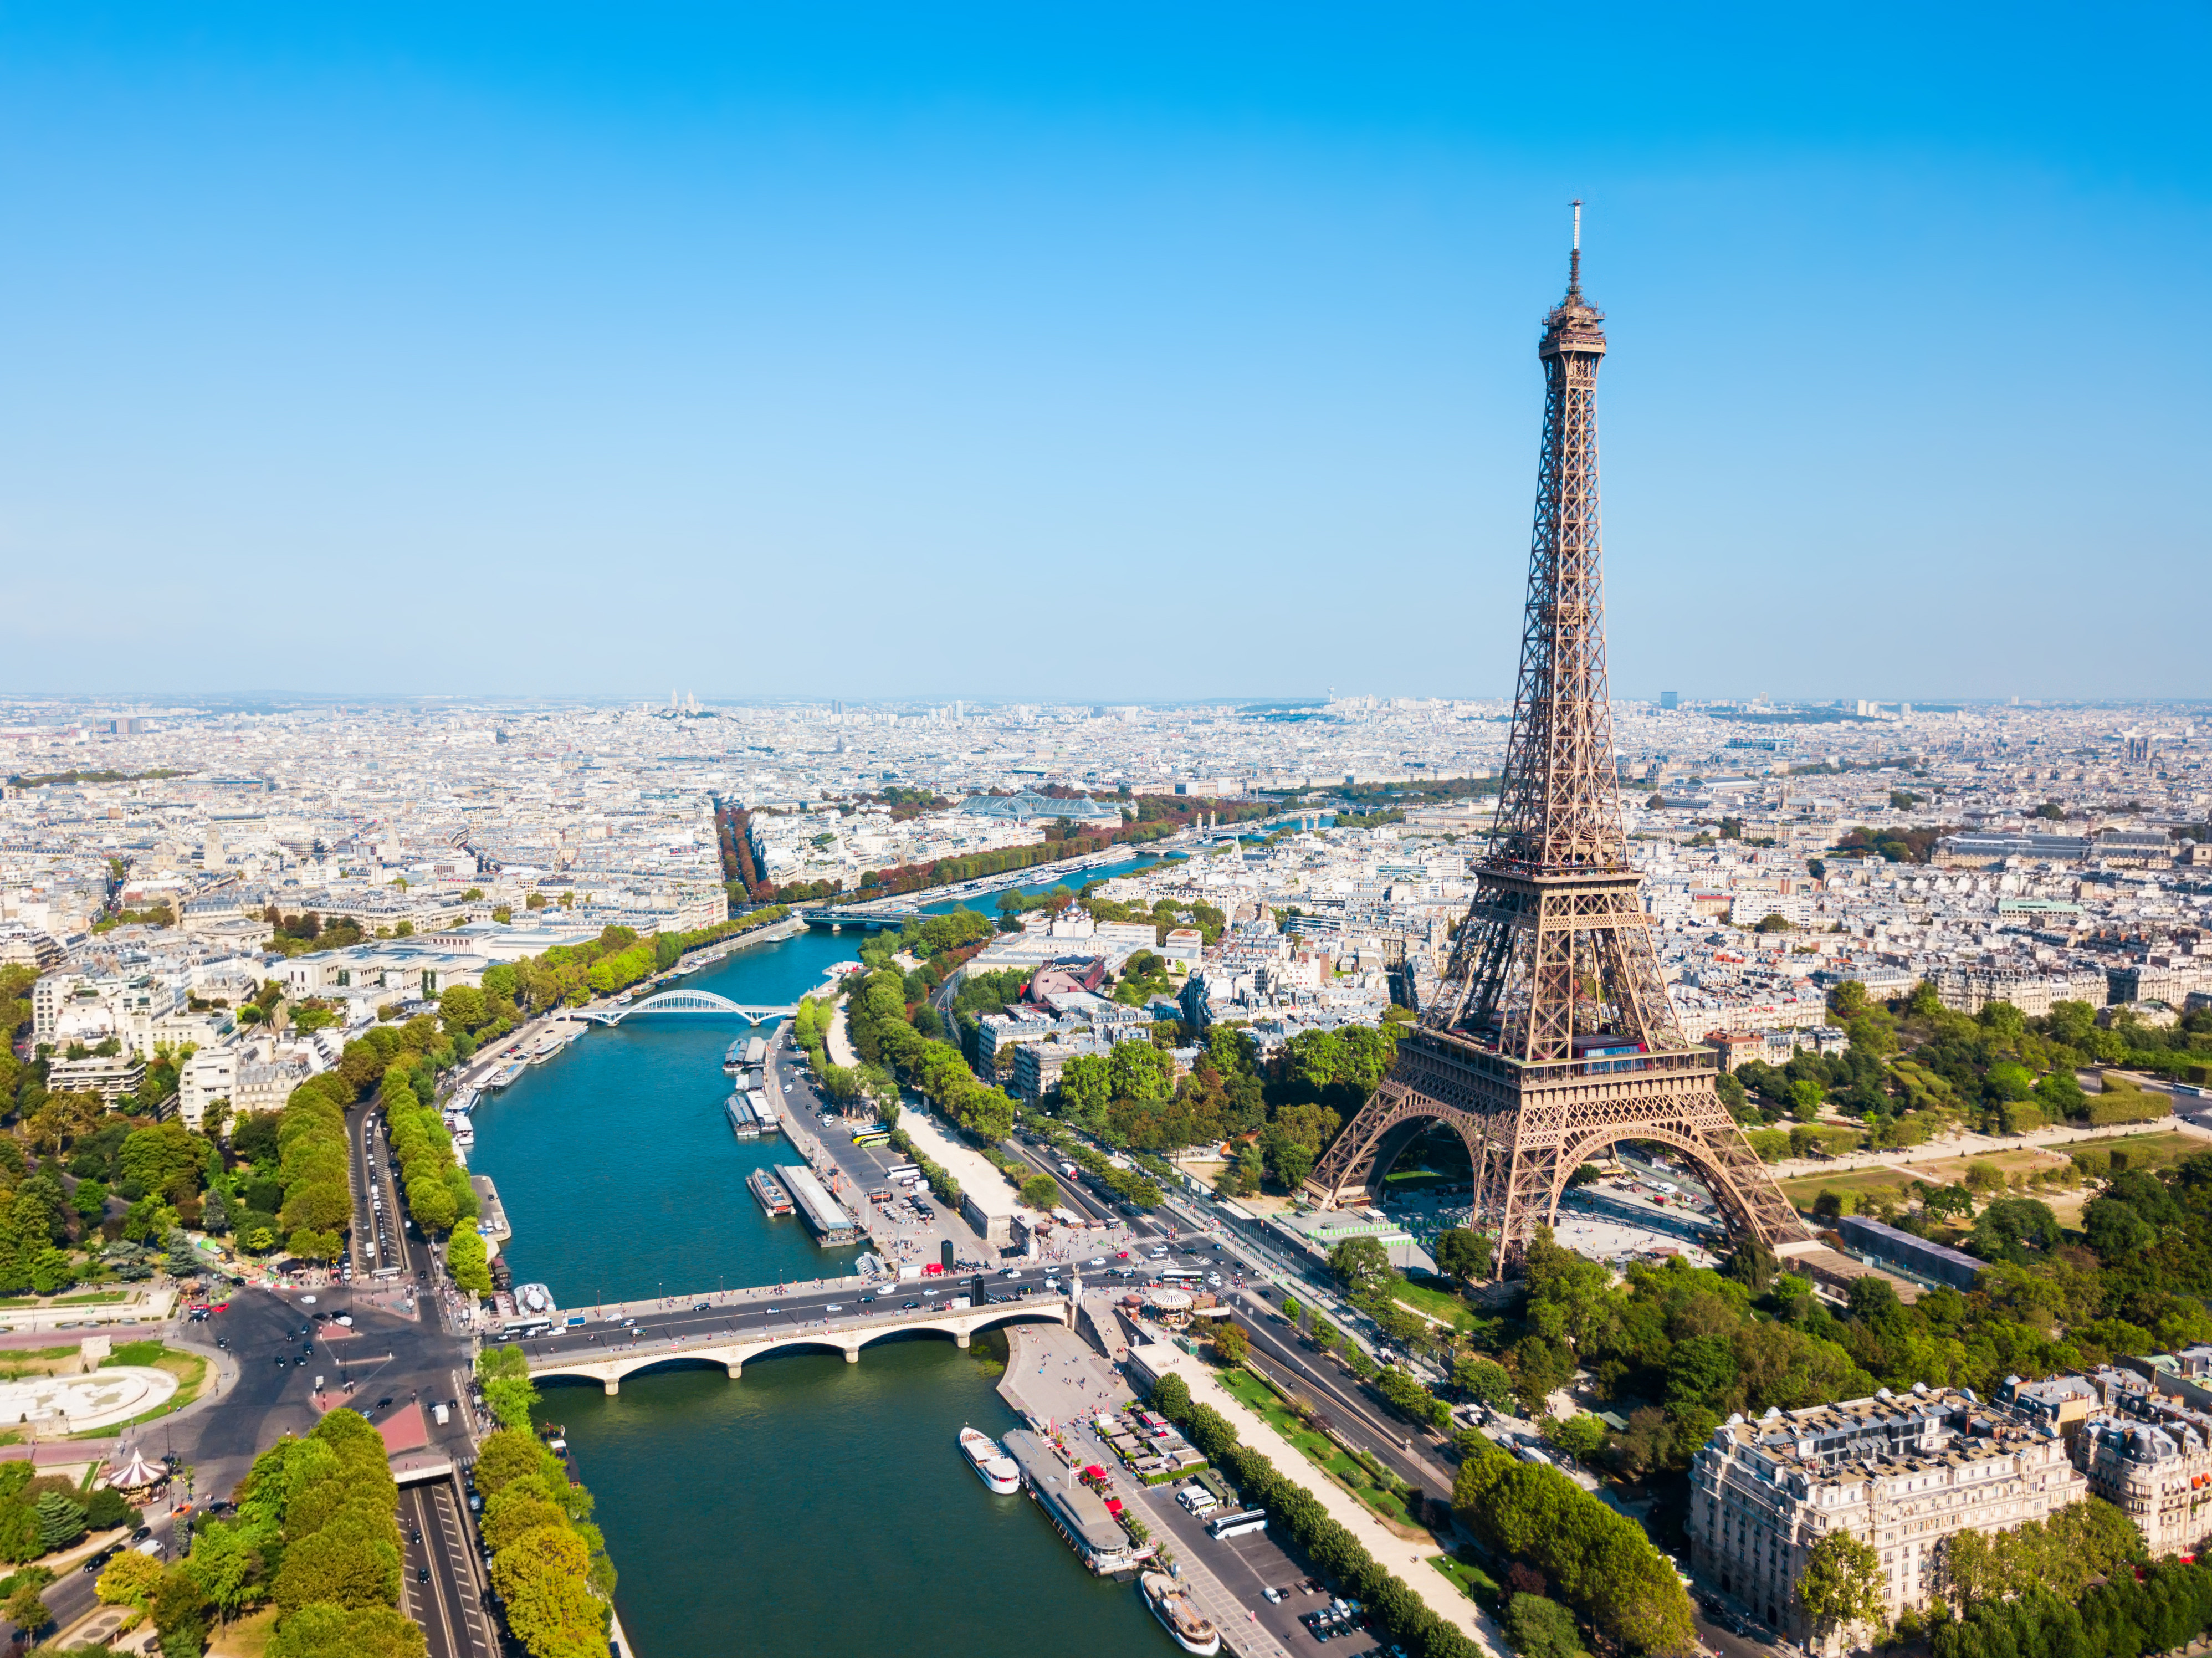 The Hotel Monitor 2024 forecasts which cities will see the biggest hotel room rate increases. Paris is among 10 predicted to see double-digit increases. Photo: Shutterstock